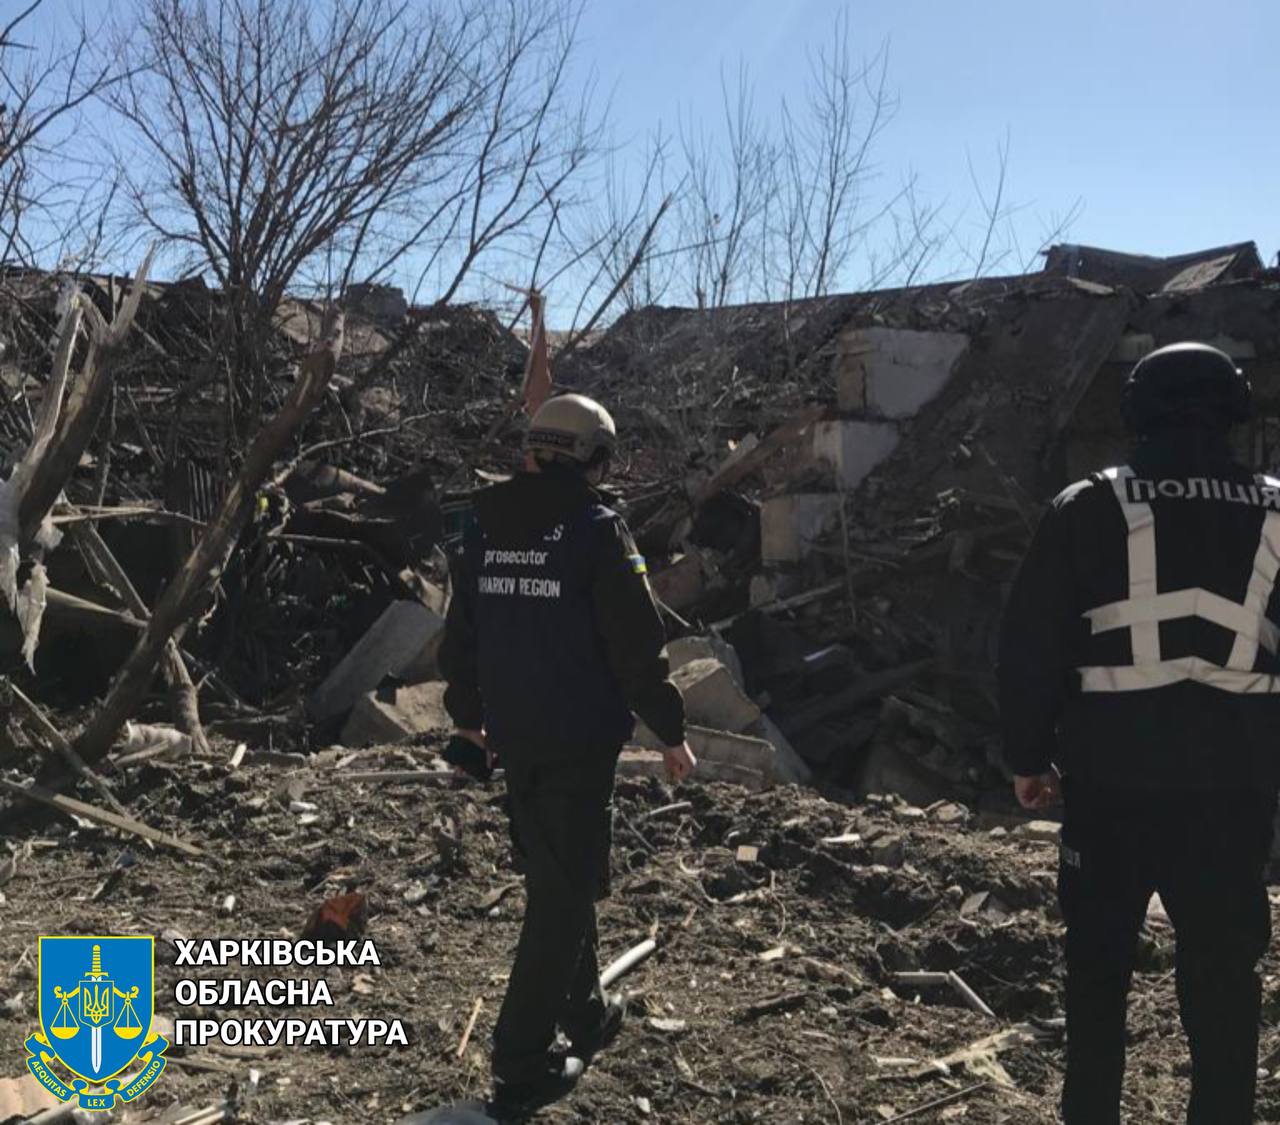 Two men in uniform standing in front of a destroyed building

Description automatically generated